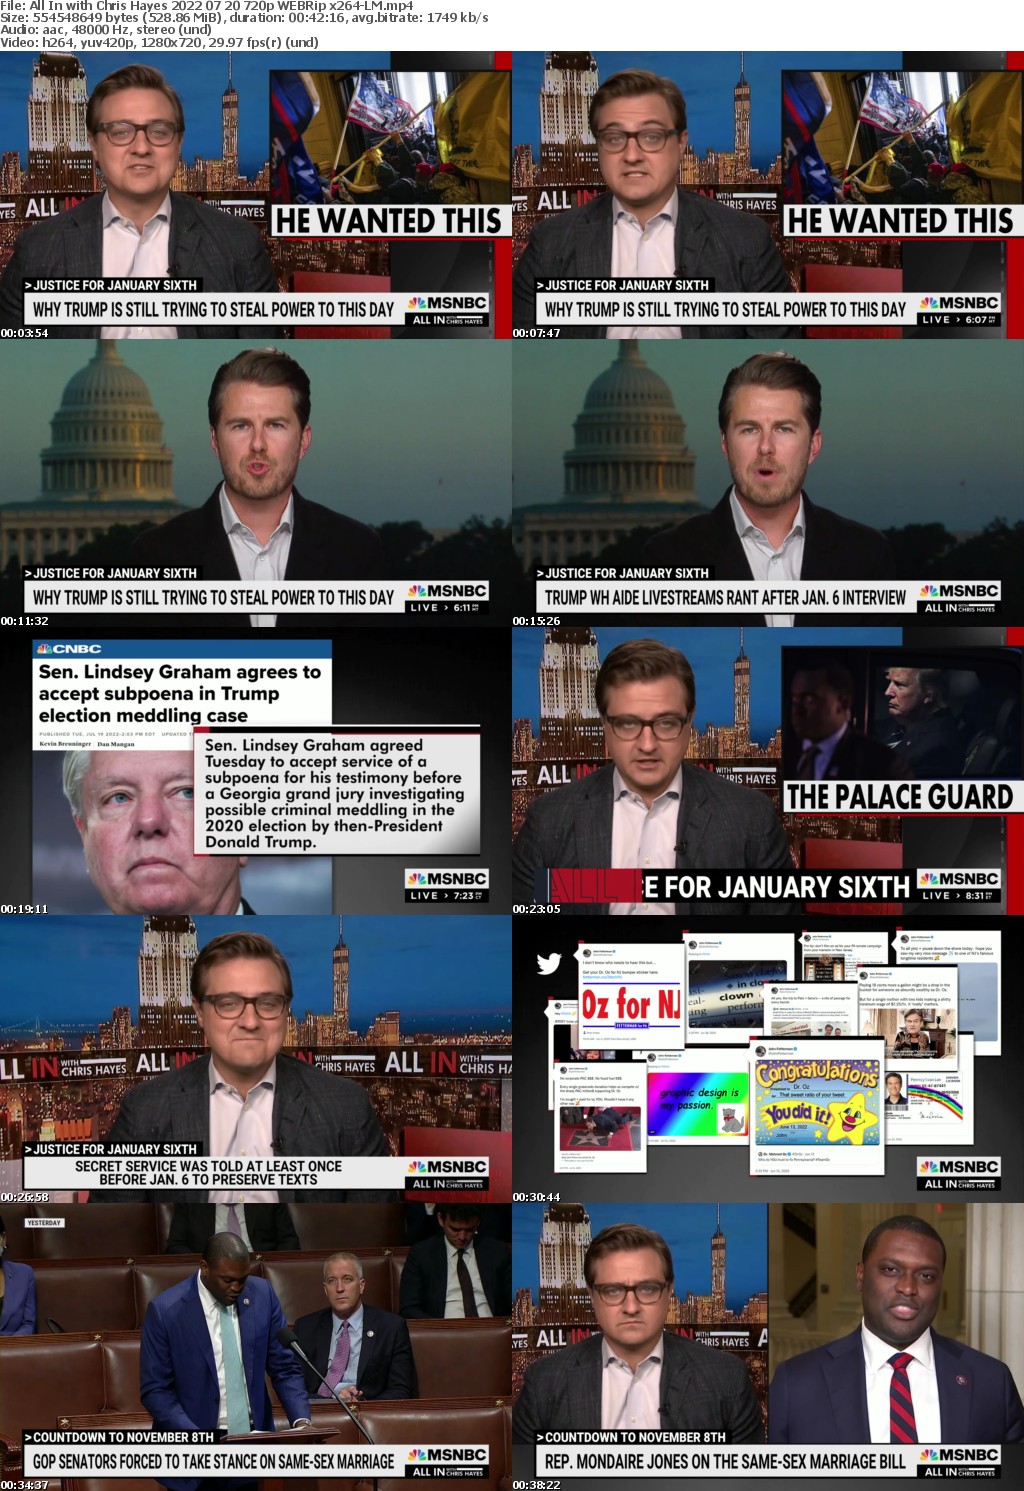 All In with Chris Hayes 2022 07 20 720p WEBRip x264-LM